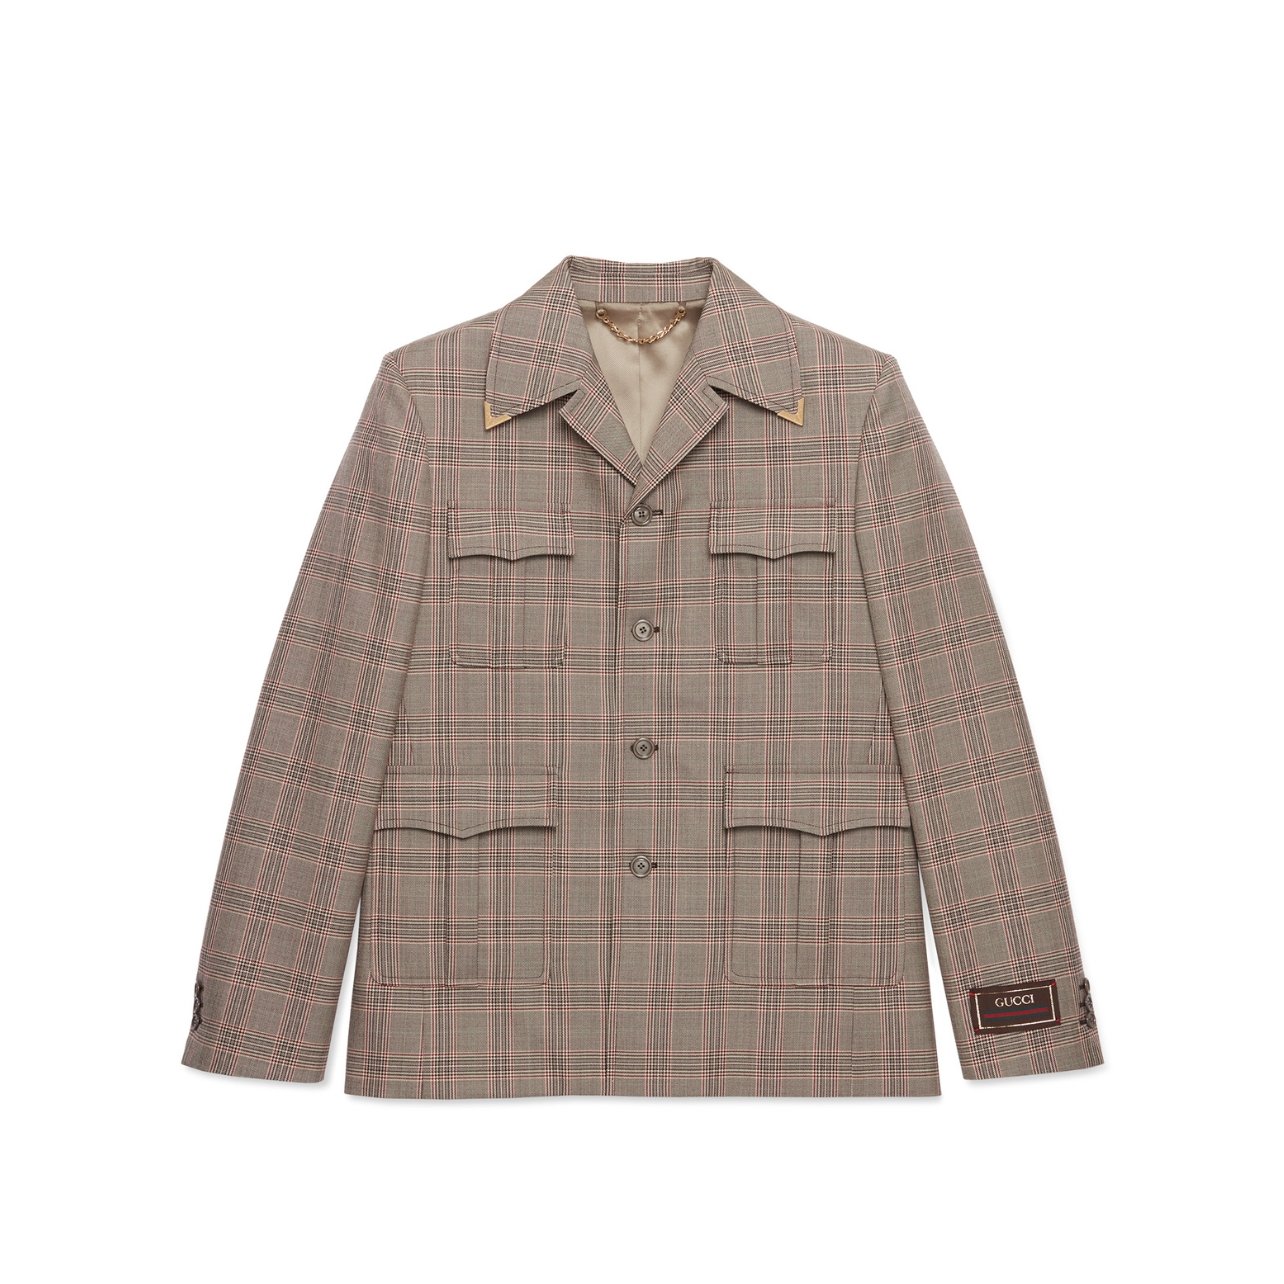 Tan checkered jacket with front chest pockets